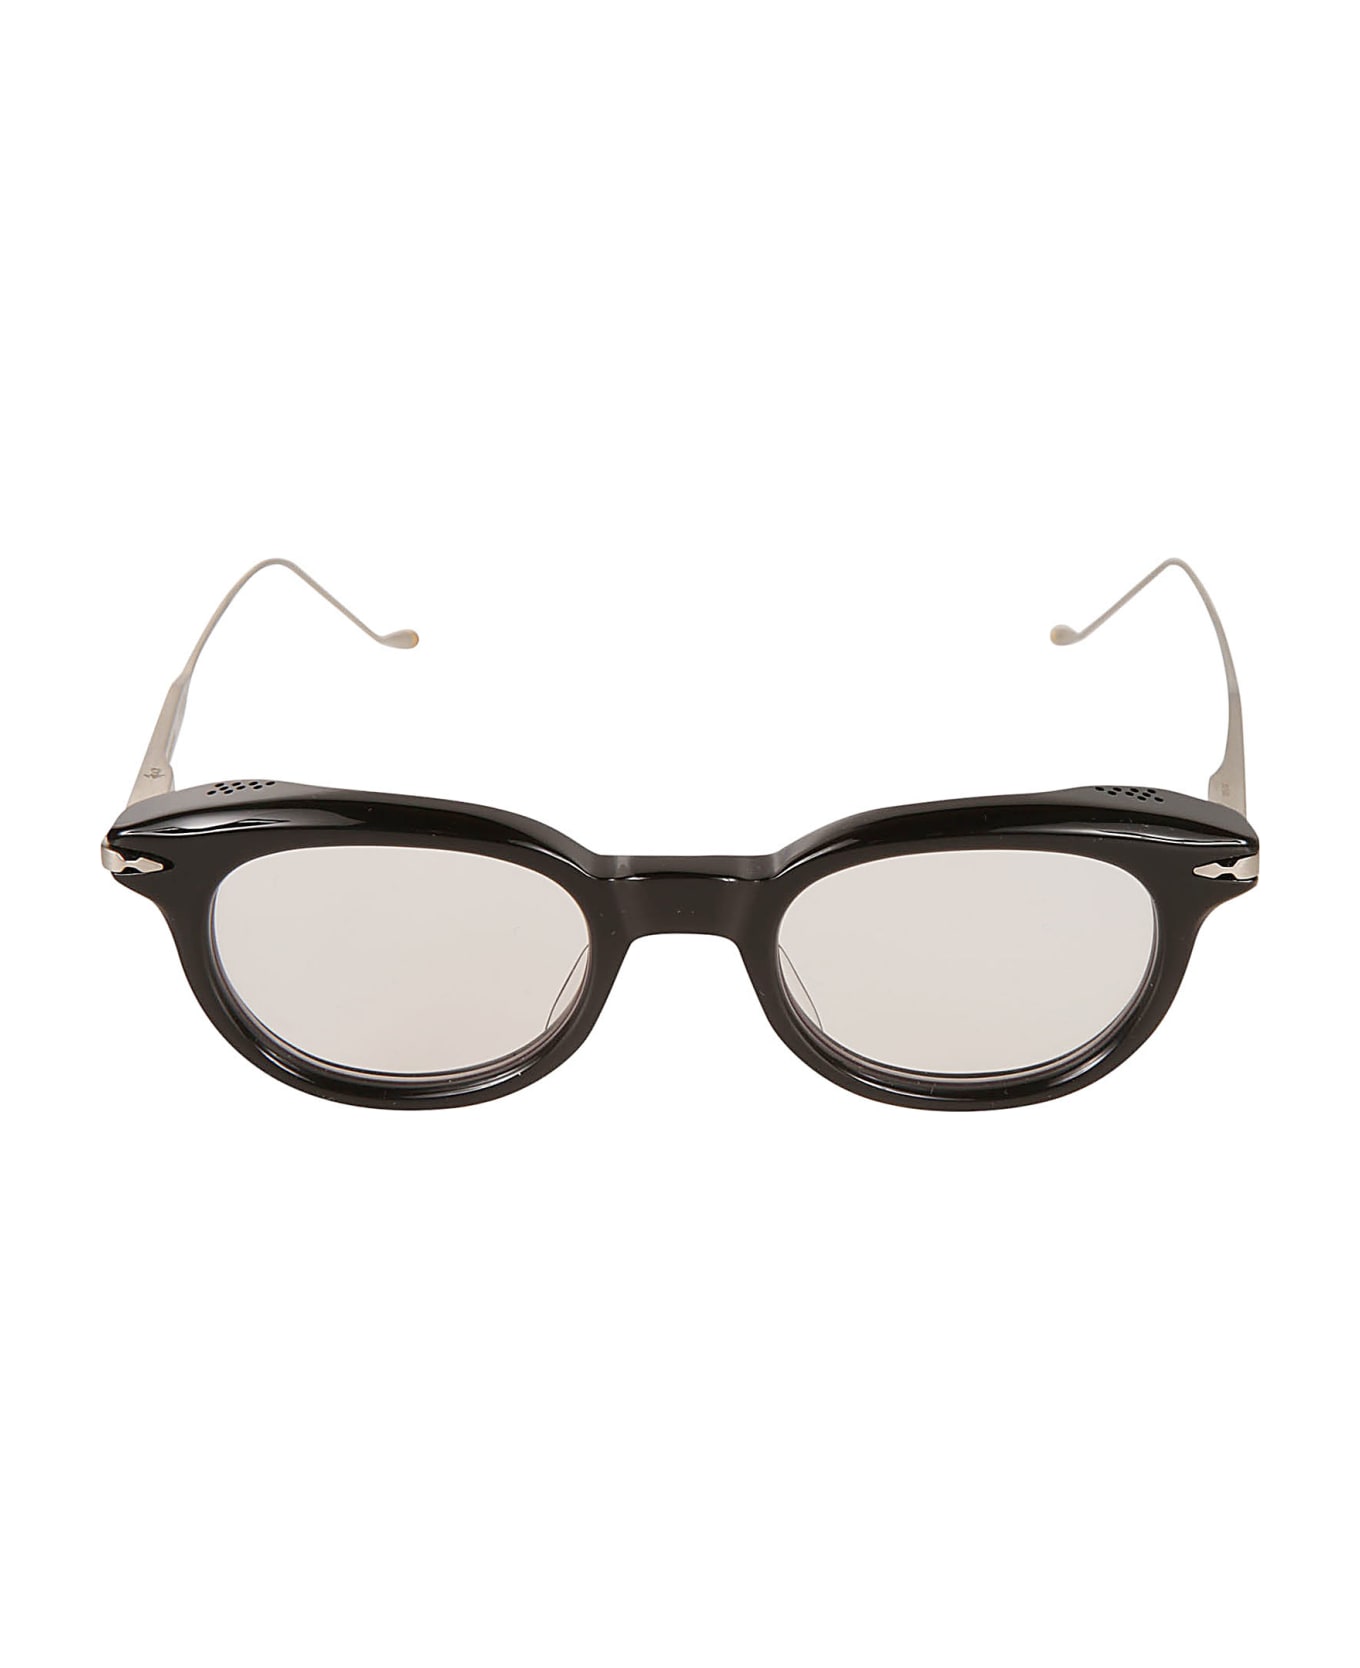 Jacques Marie Mage Hisao Frame - noir